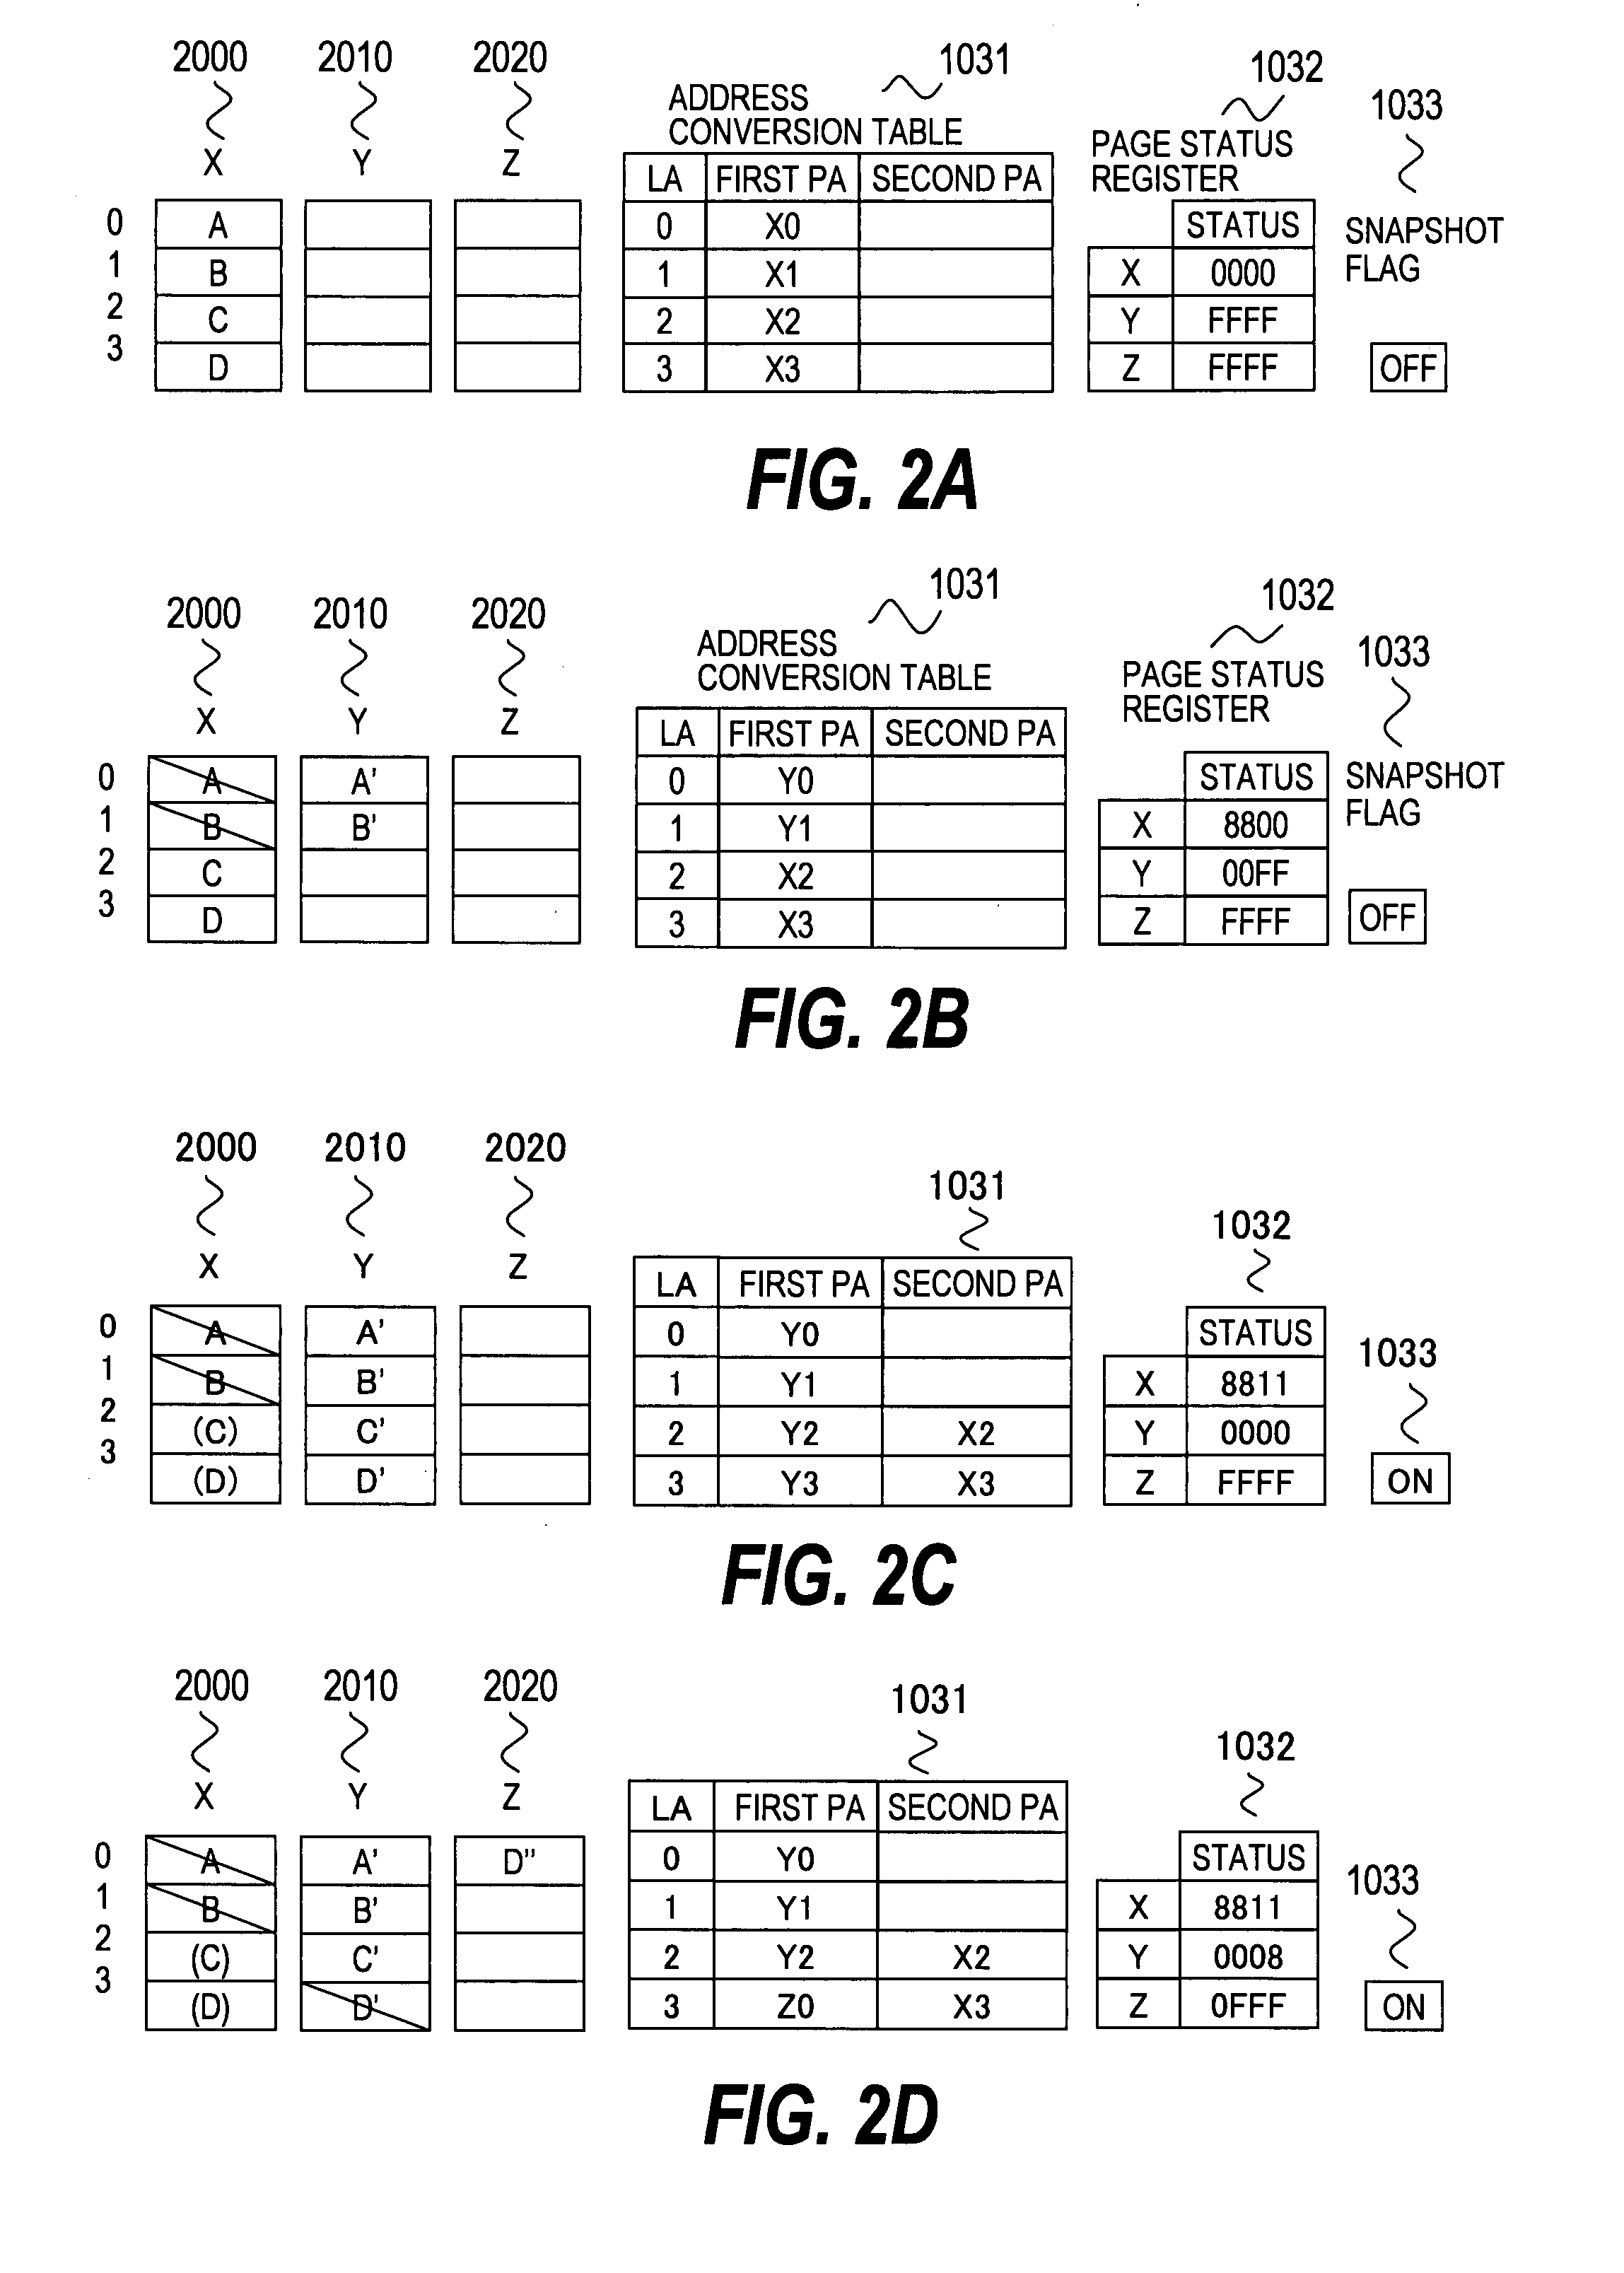 Semiconductor memory system having a snapshot function